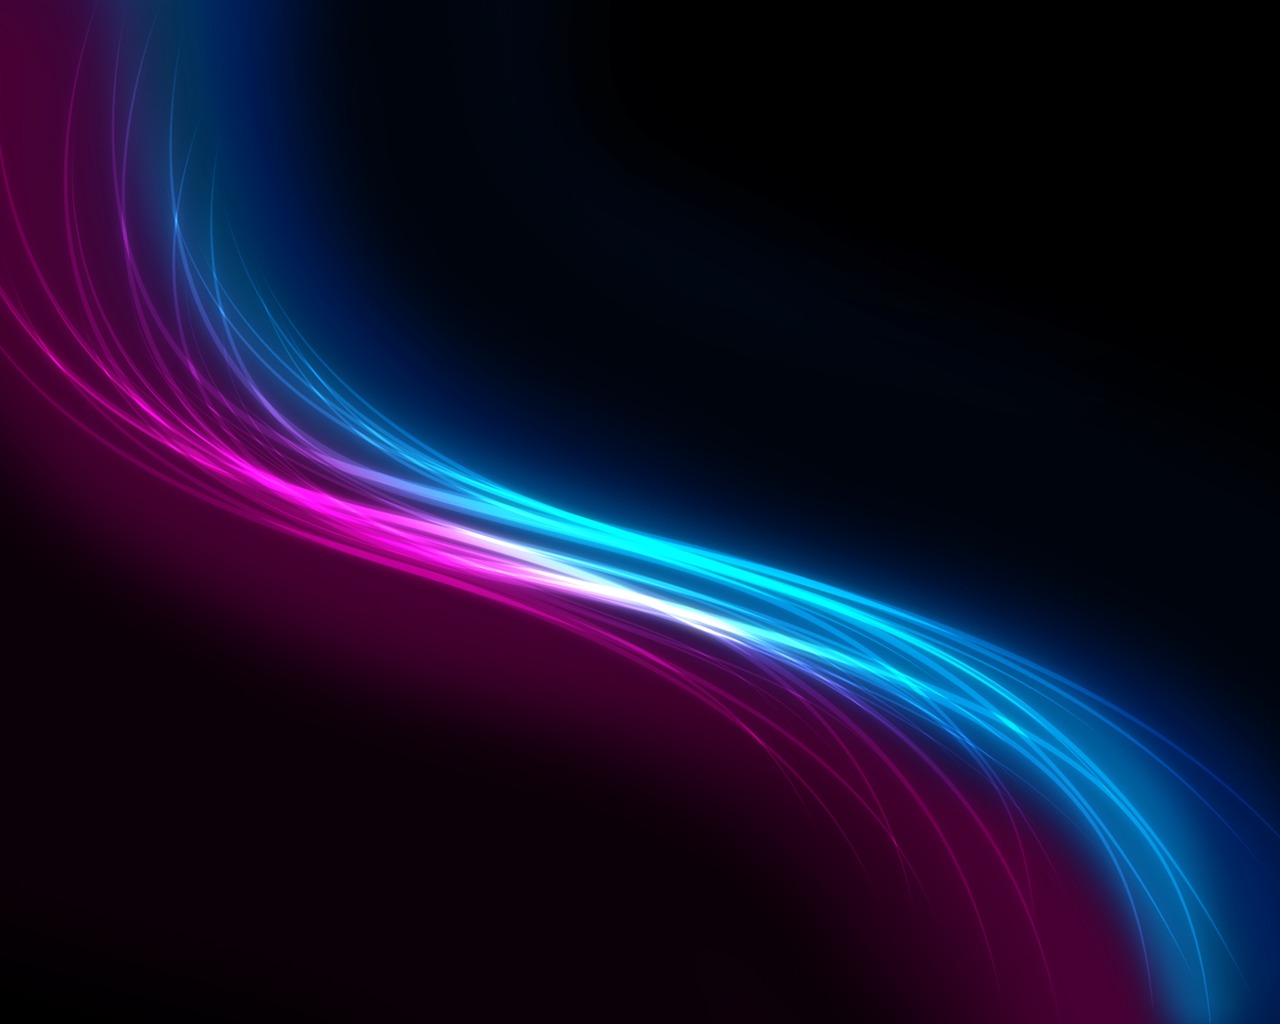 Blue and Purple Abstract Background Designs